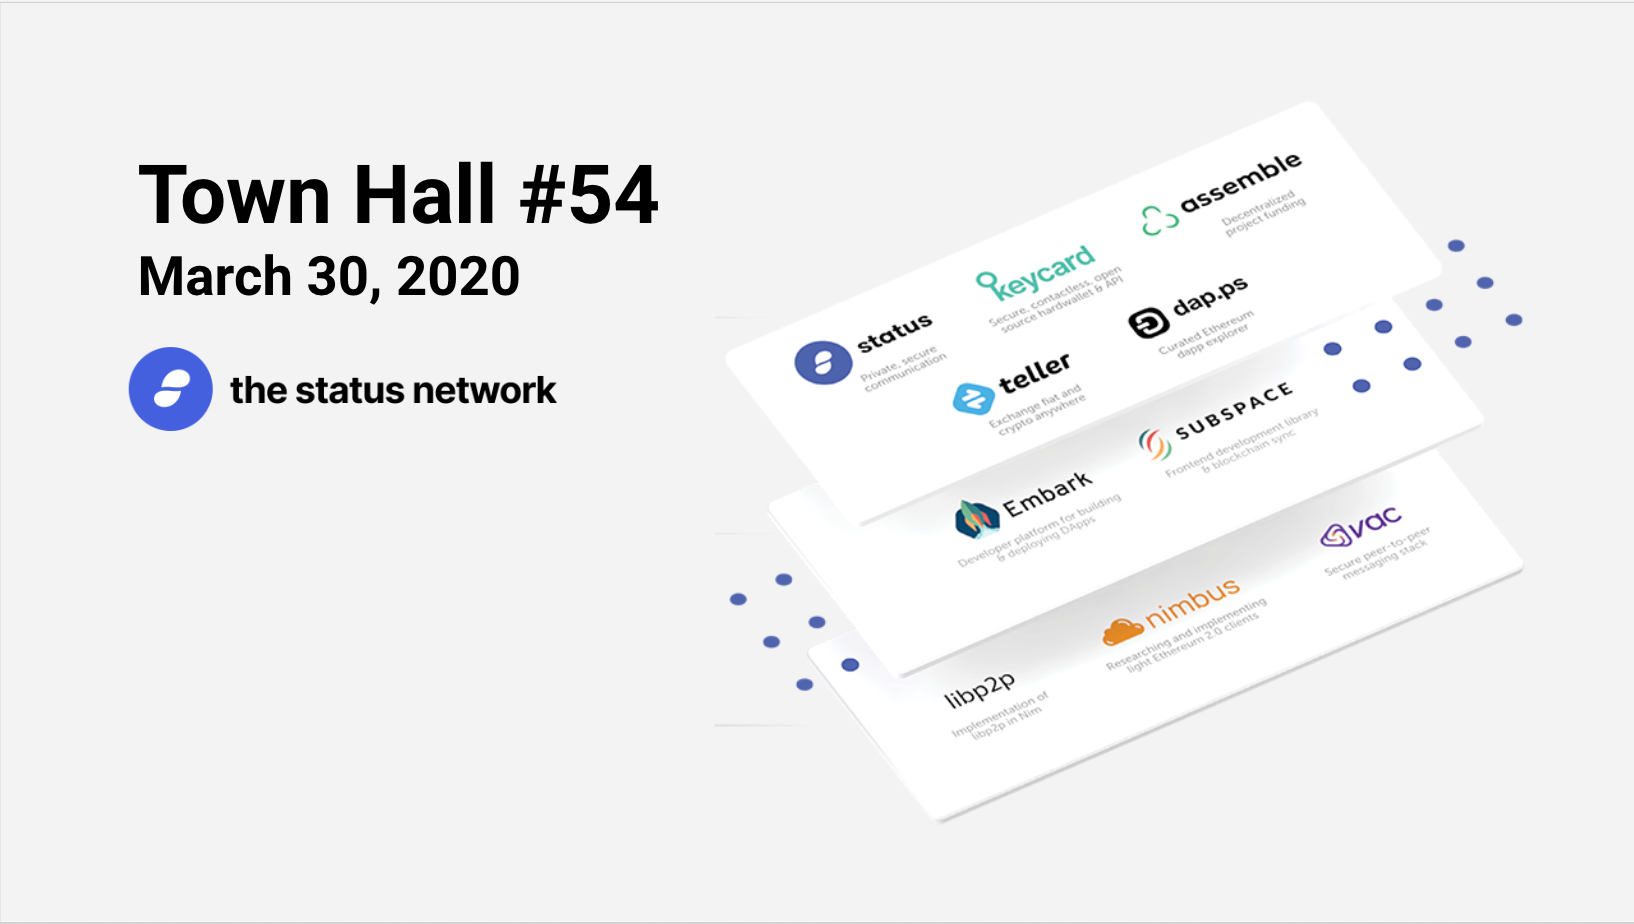 Town Hall #54 - March 30, 2020